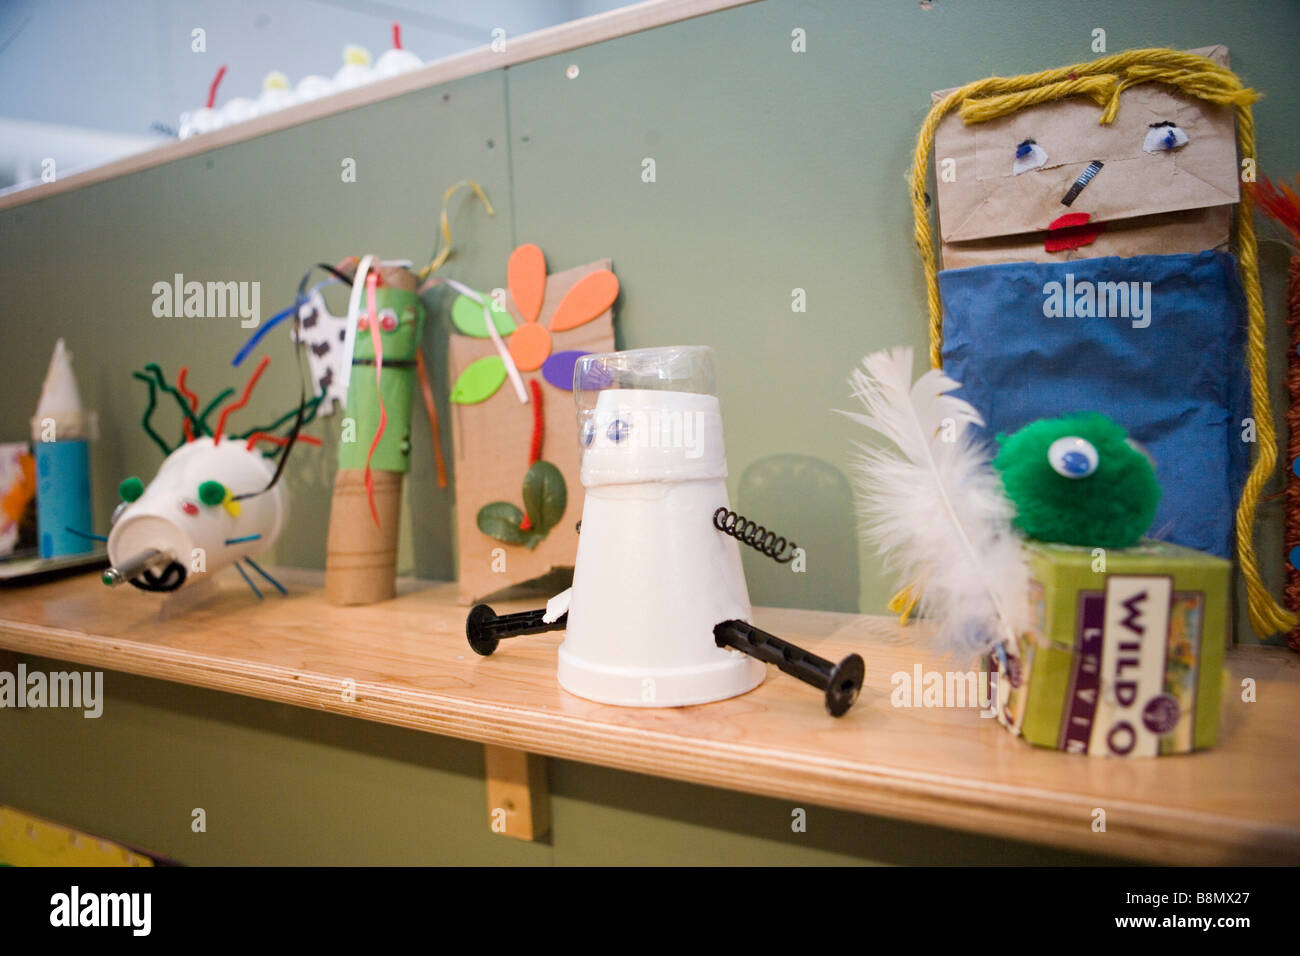 bag puppets, dolls, and toys made of simple recycled materials Stock Photo